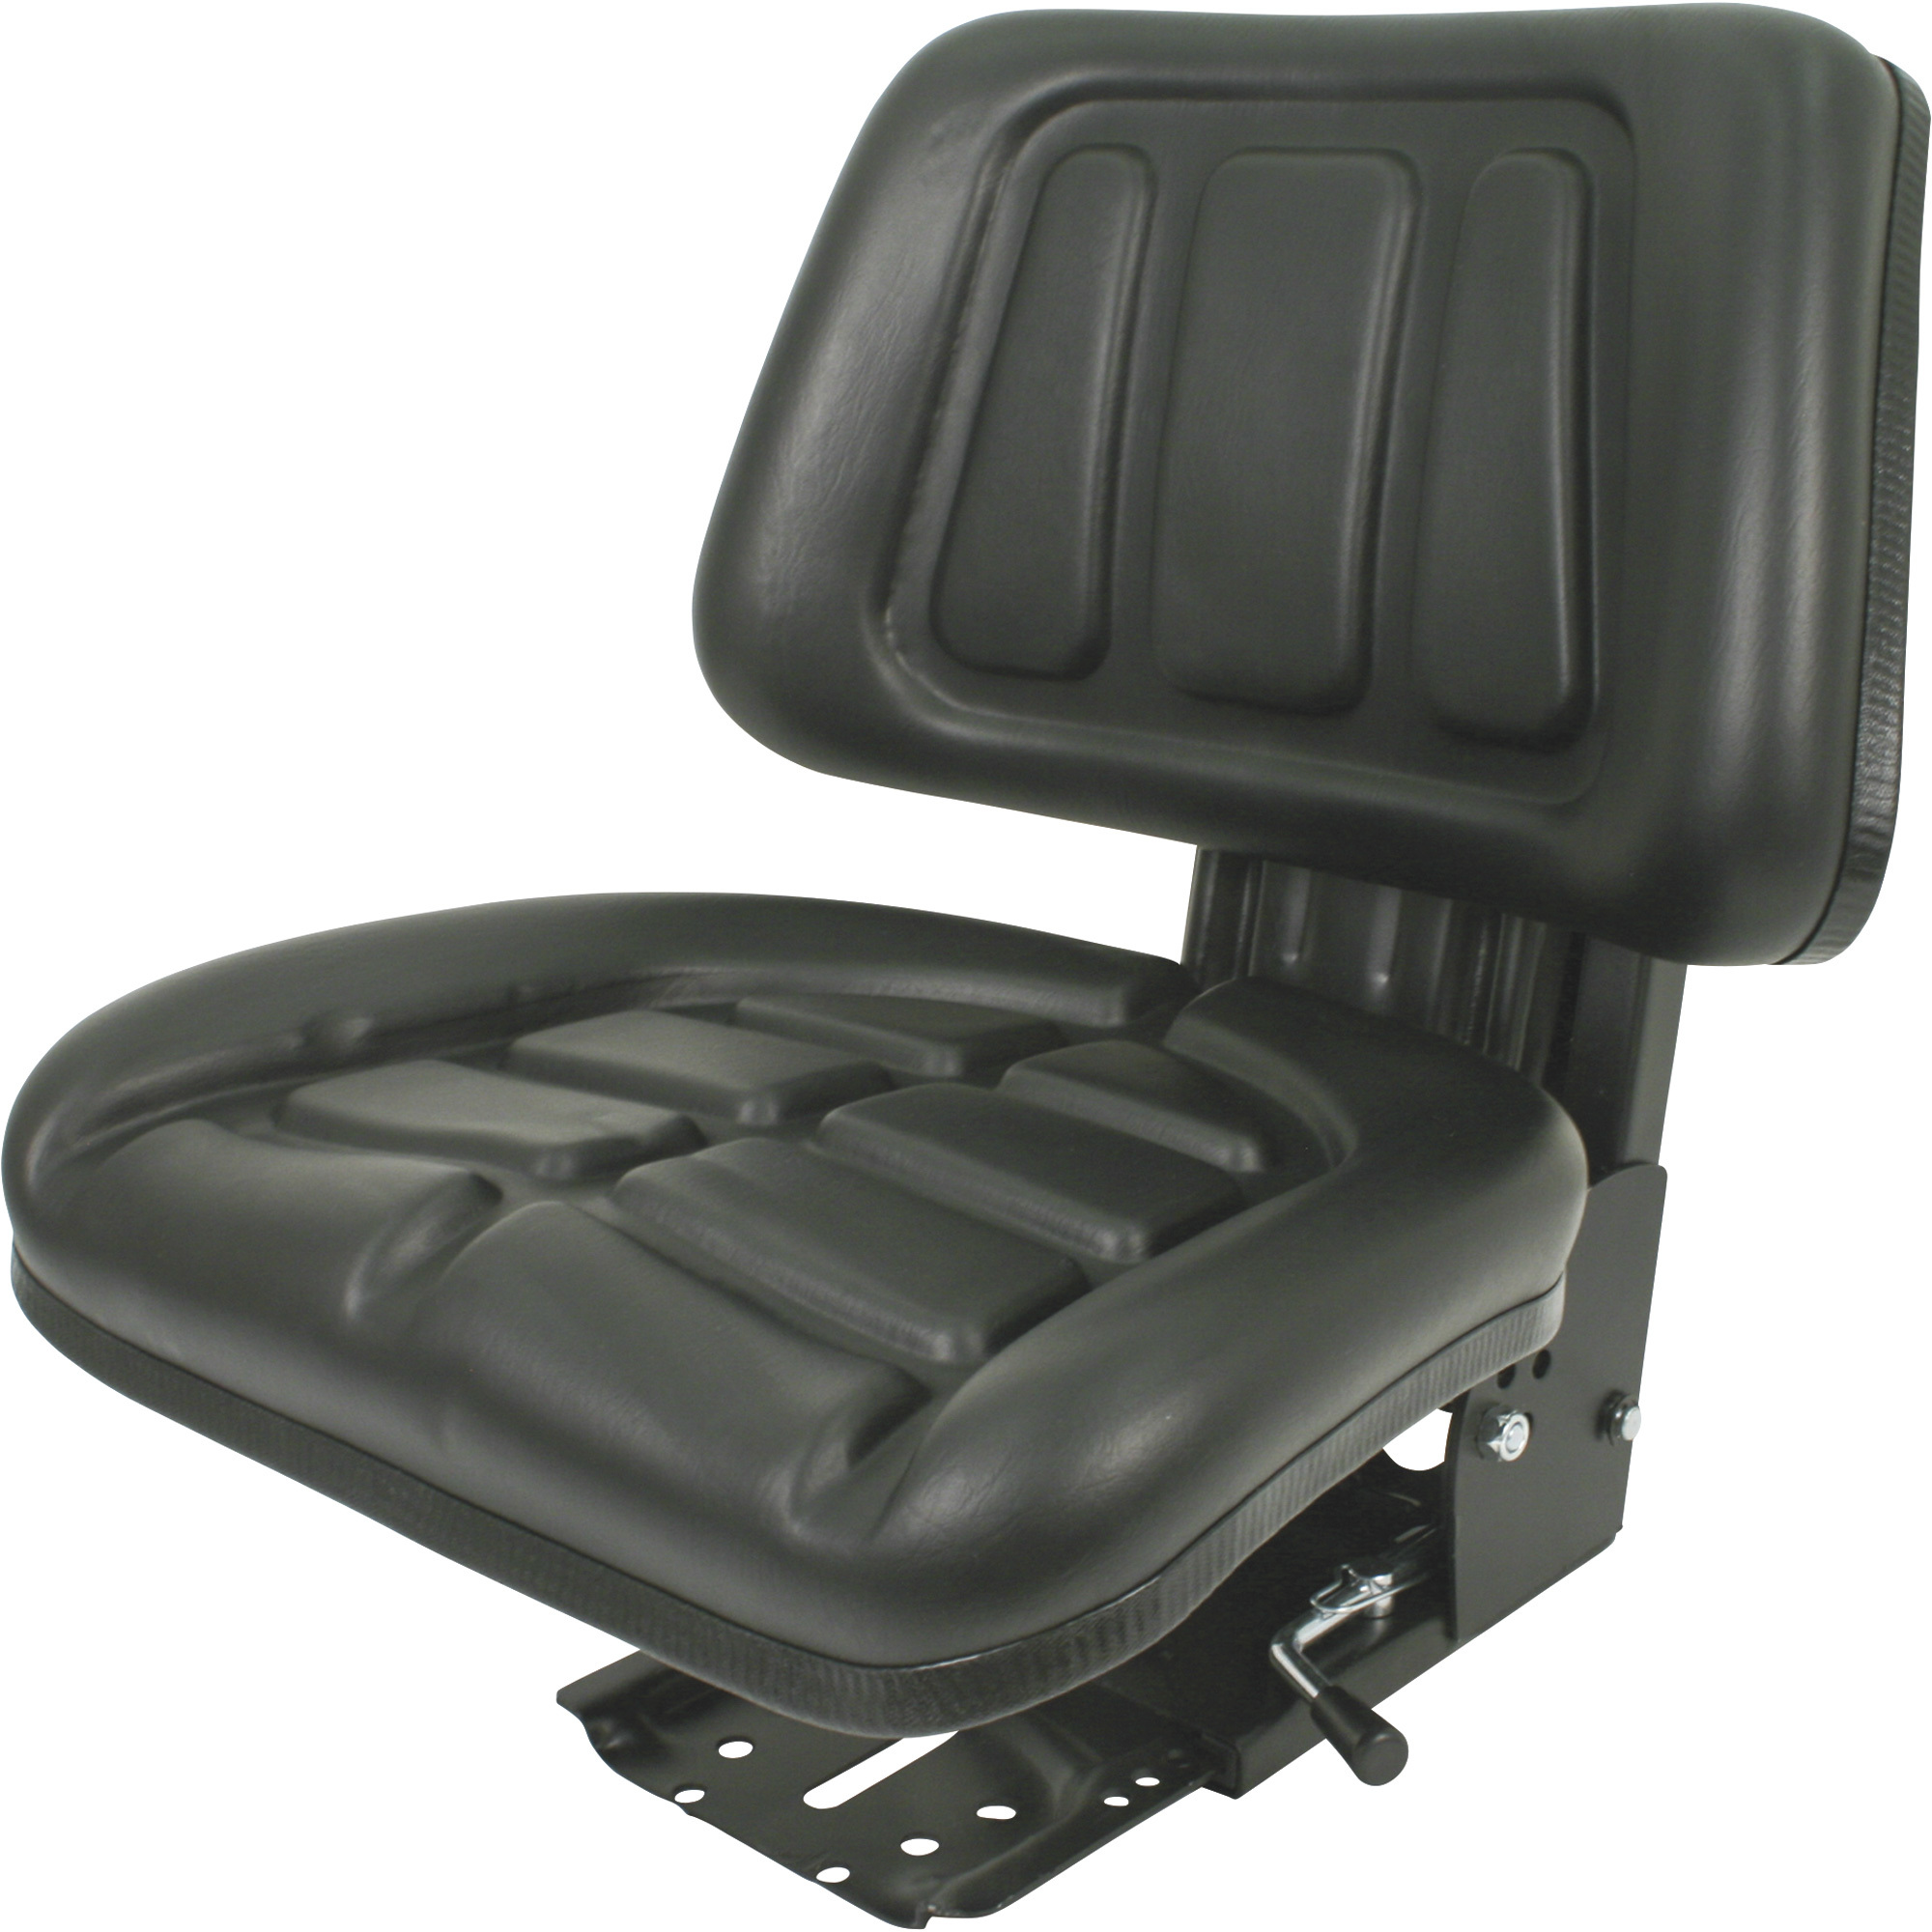 A & I Suspension Tractor Seat with Trapezoid Backrest â Black, Model T333BL